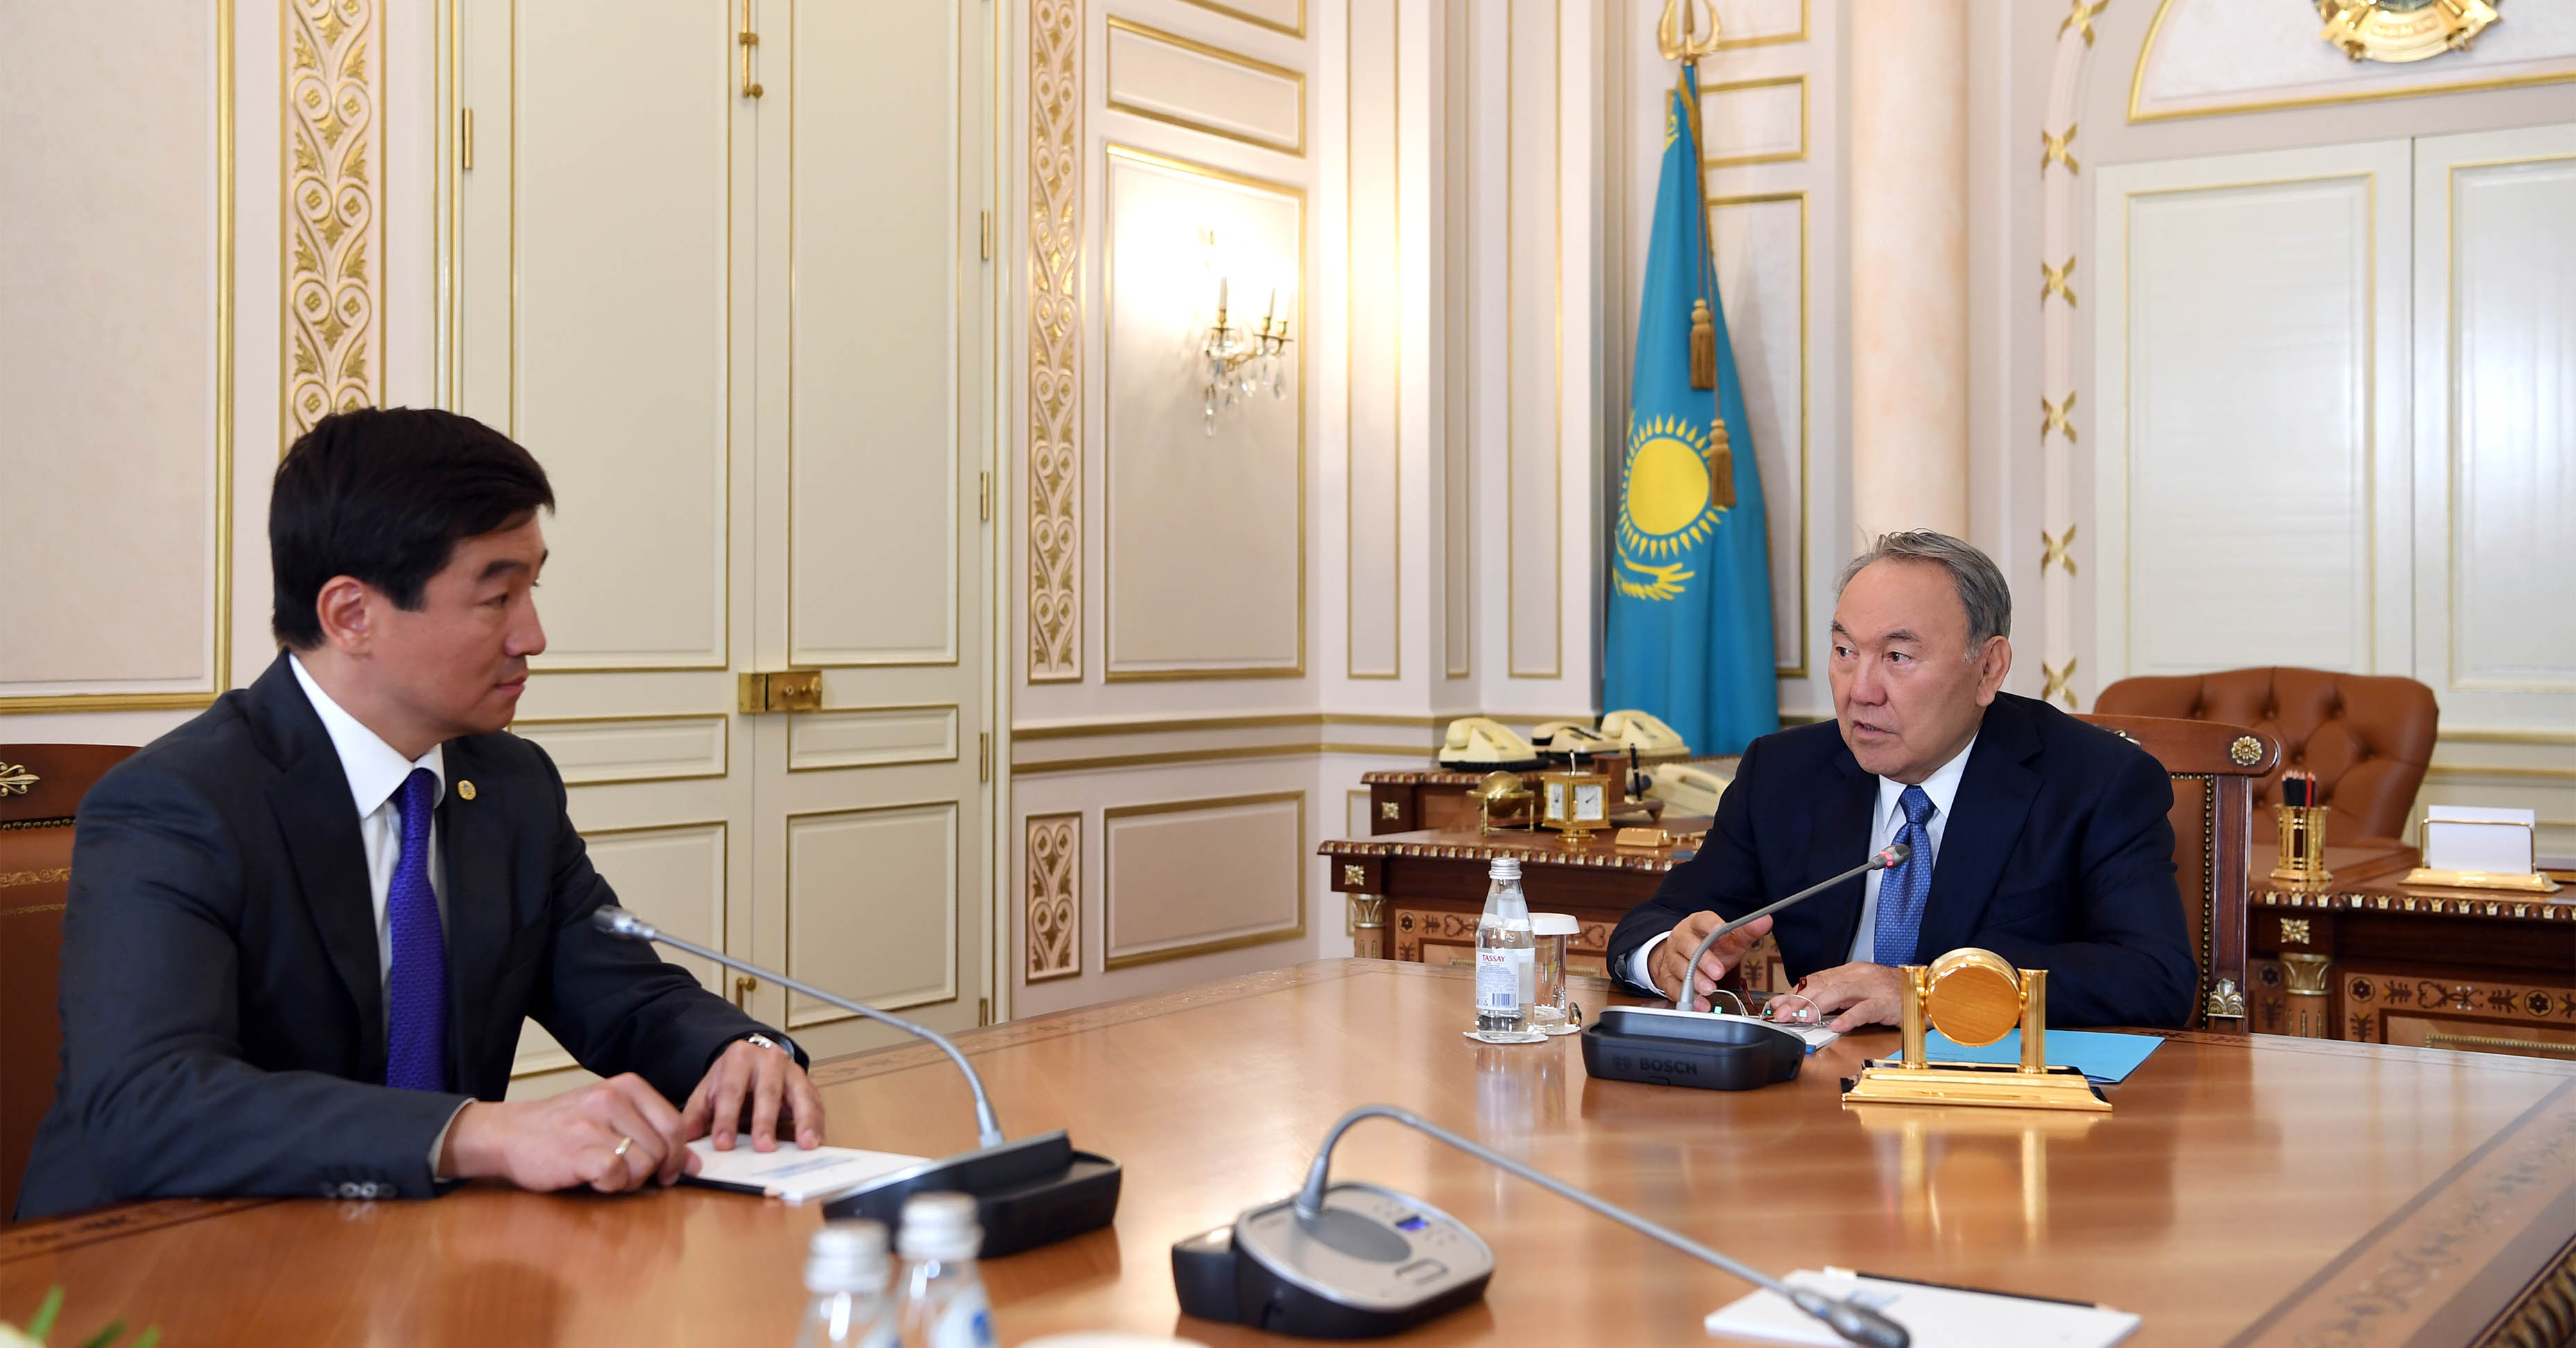 The Head of State holds a meeting with akim of Almaty, Bauyrzhan Baibek